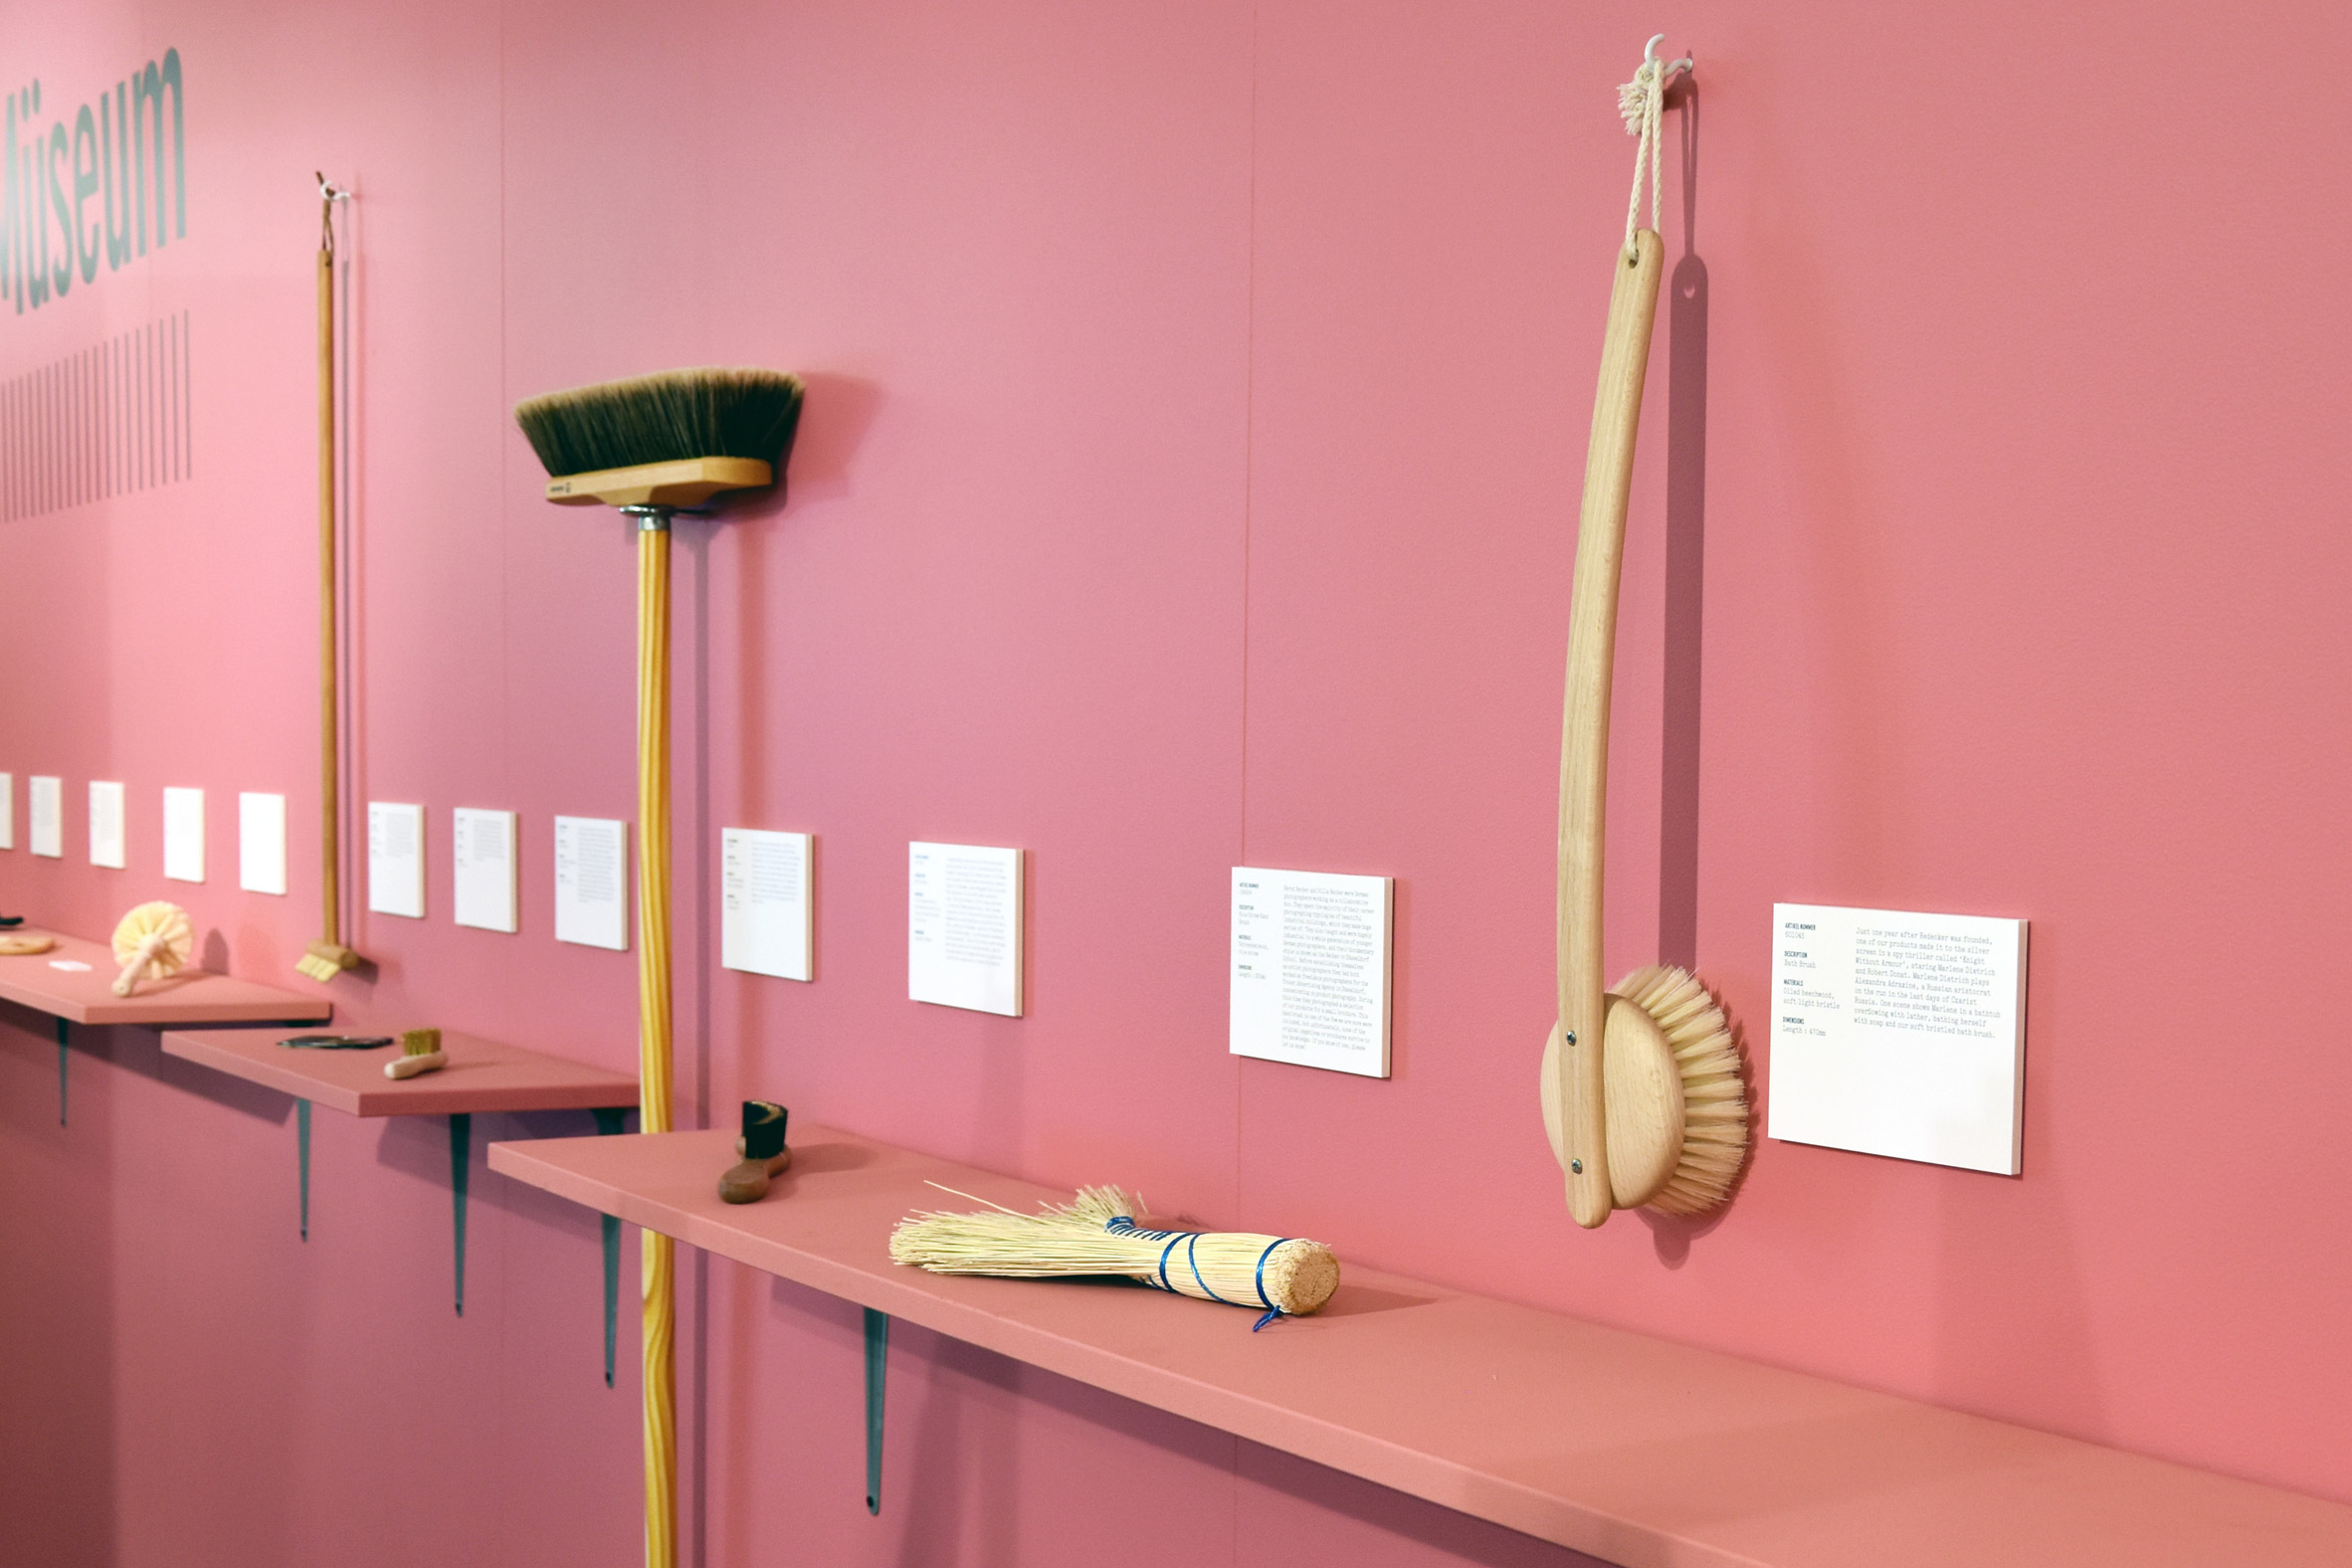 Bürstenhaus Redecker Müseum is a travelling showcase of brushes curated by Michael Marriott